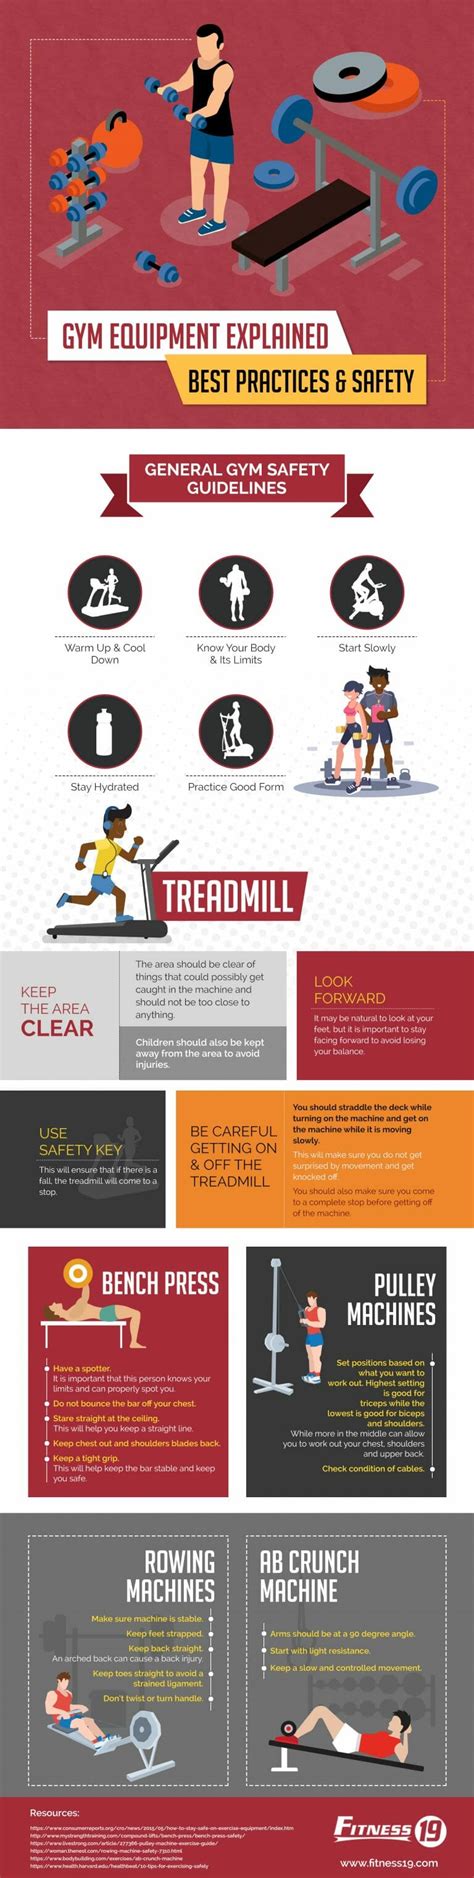 Gym Equipment Explained Best Practices And Safety Fitness 19 Gyms